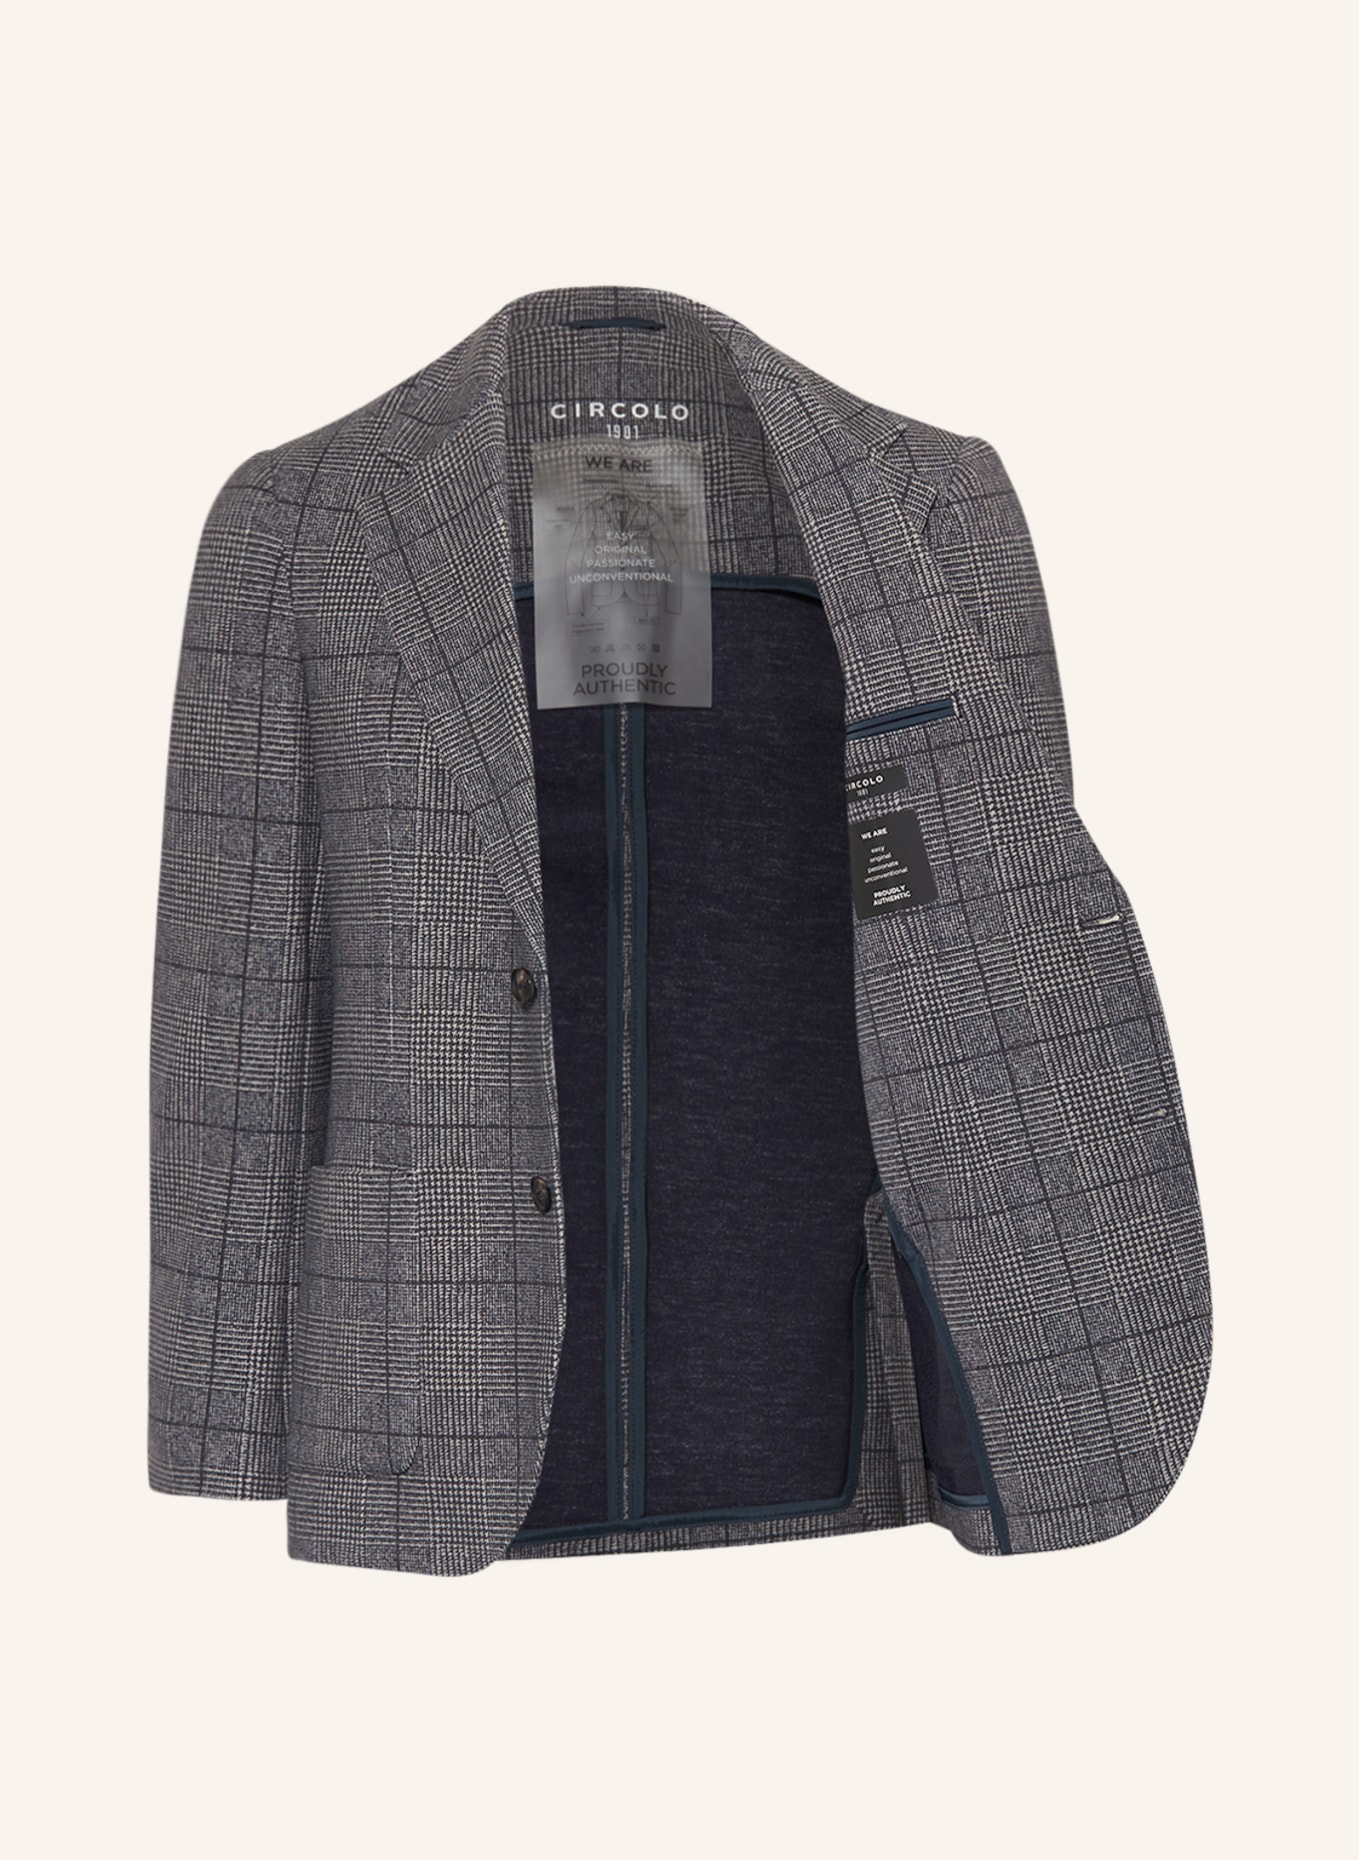 CIRCOLO 1901 Suit jacket extra slim fit made of jersey, Color: DARK BLUE/ LIGHT GRAY (Image 4)